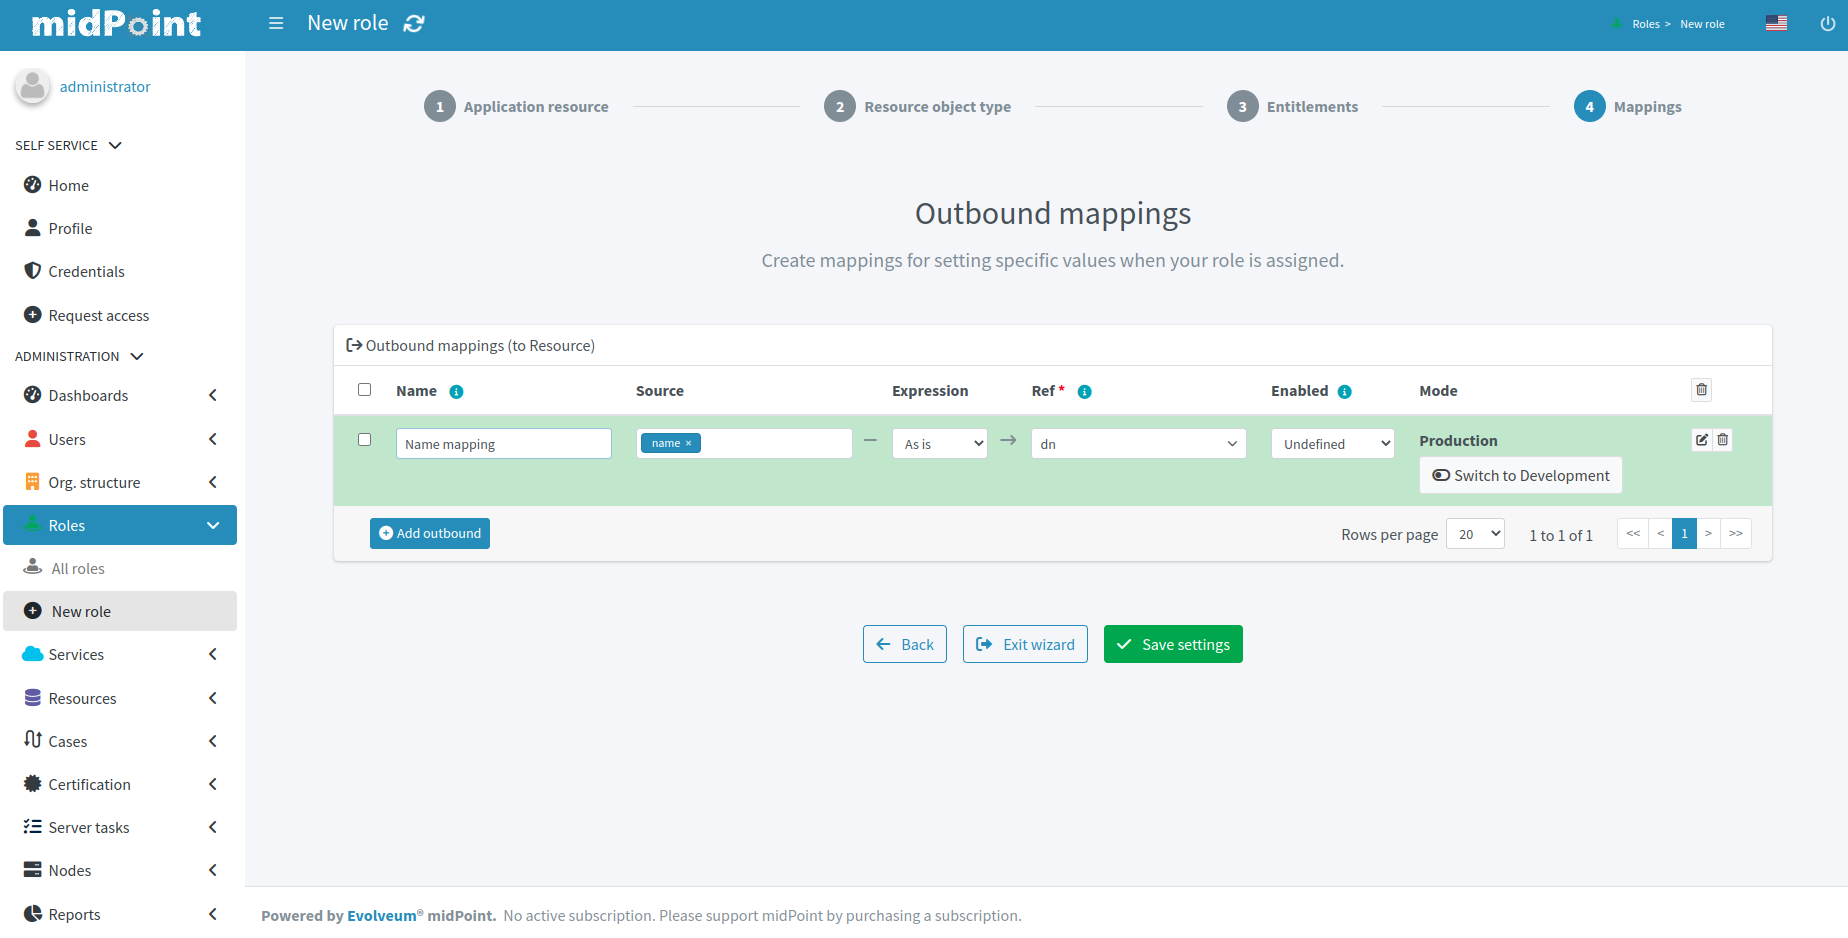 arw step 4 configuration of outbound mappings